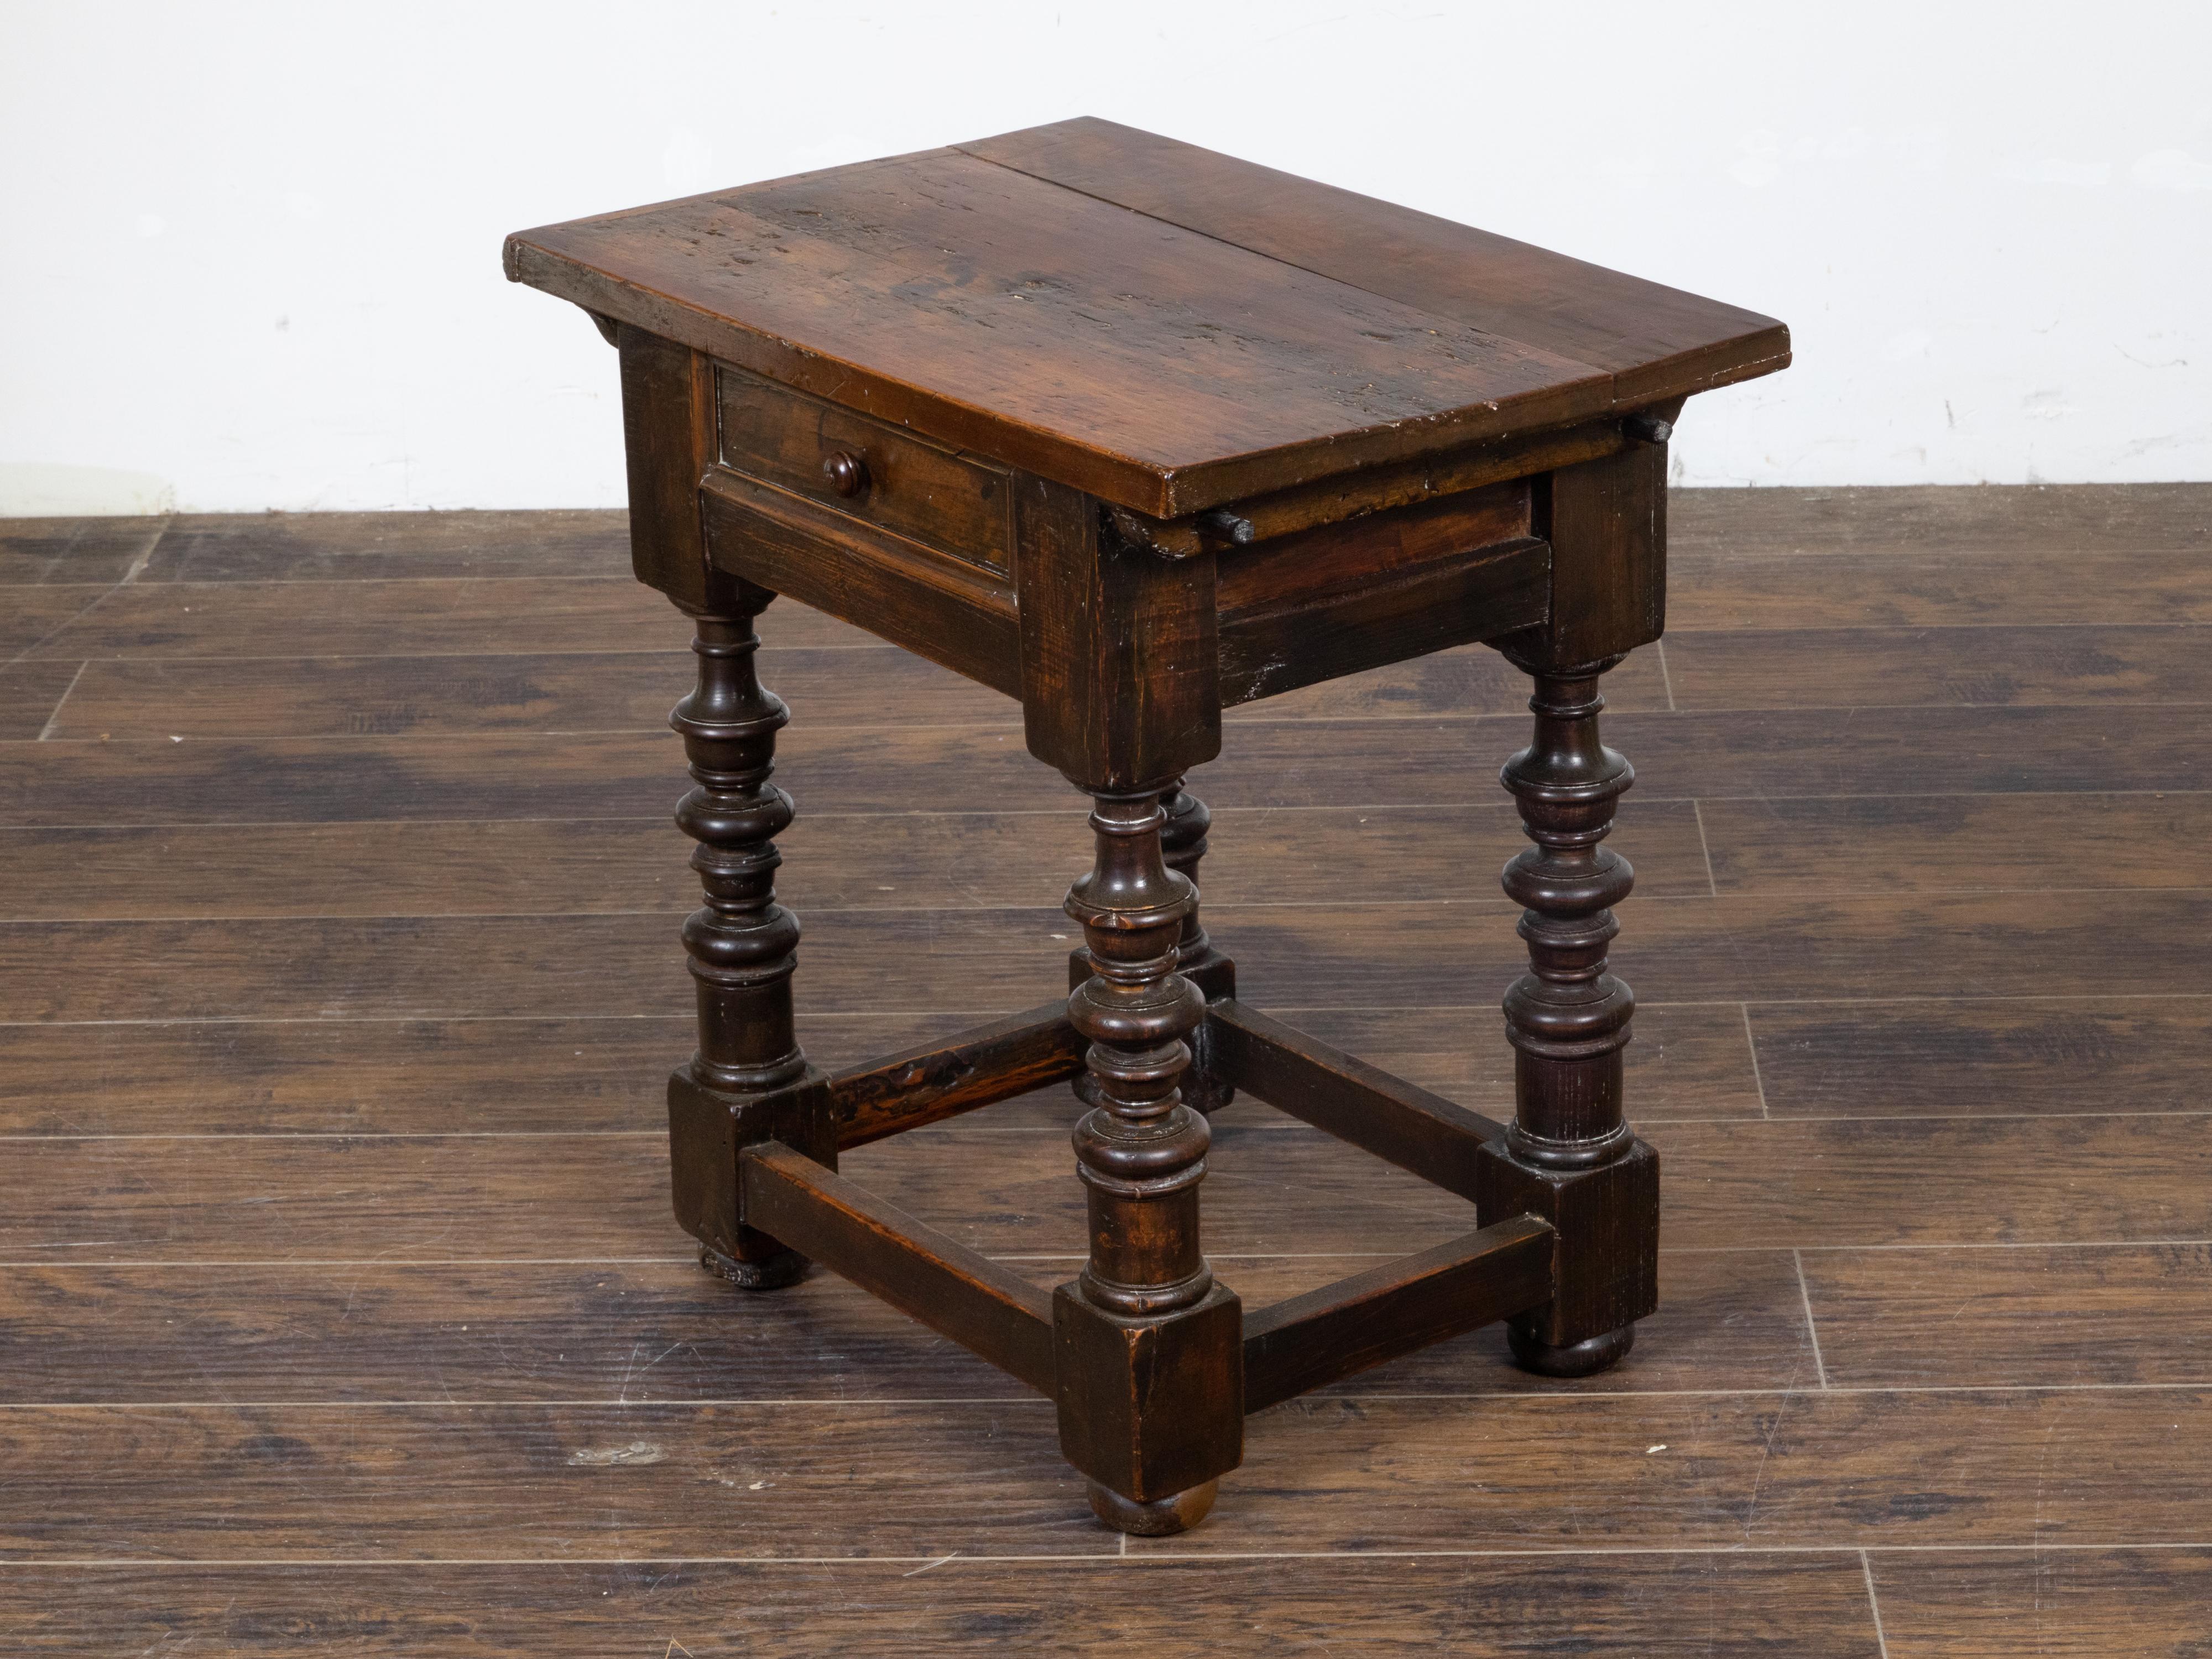 An Italian walnut side table from the 18th century with single drawer and recessed panel, four turned legs, rectangular block joints, plain side stretchers and weathered patina. This Italian walnut side table hailing from the 18th century, instantly